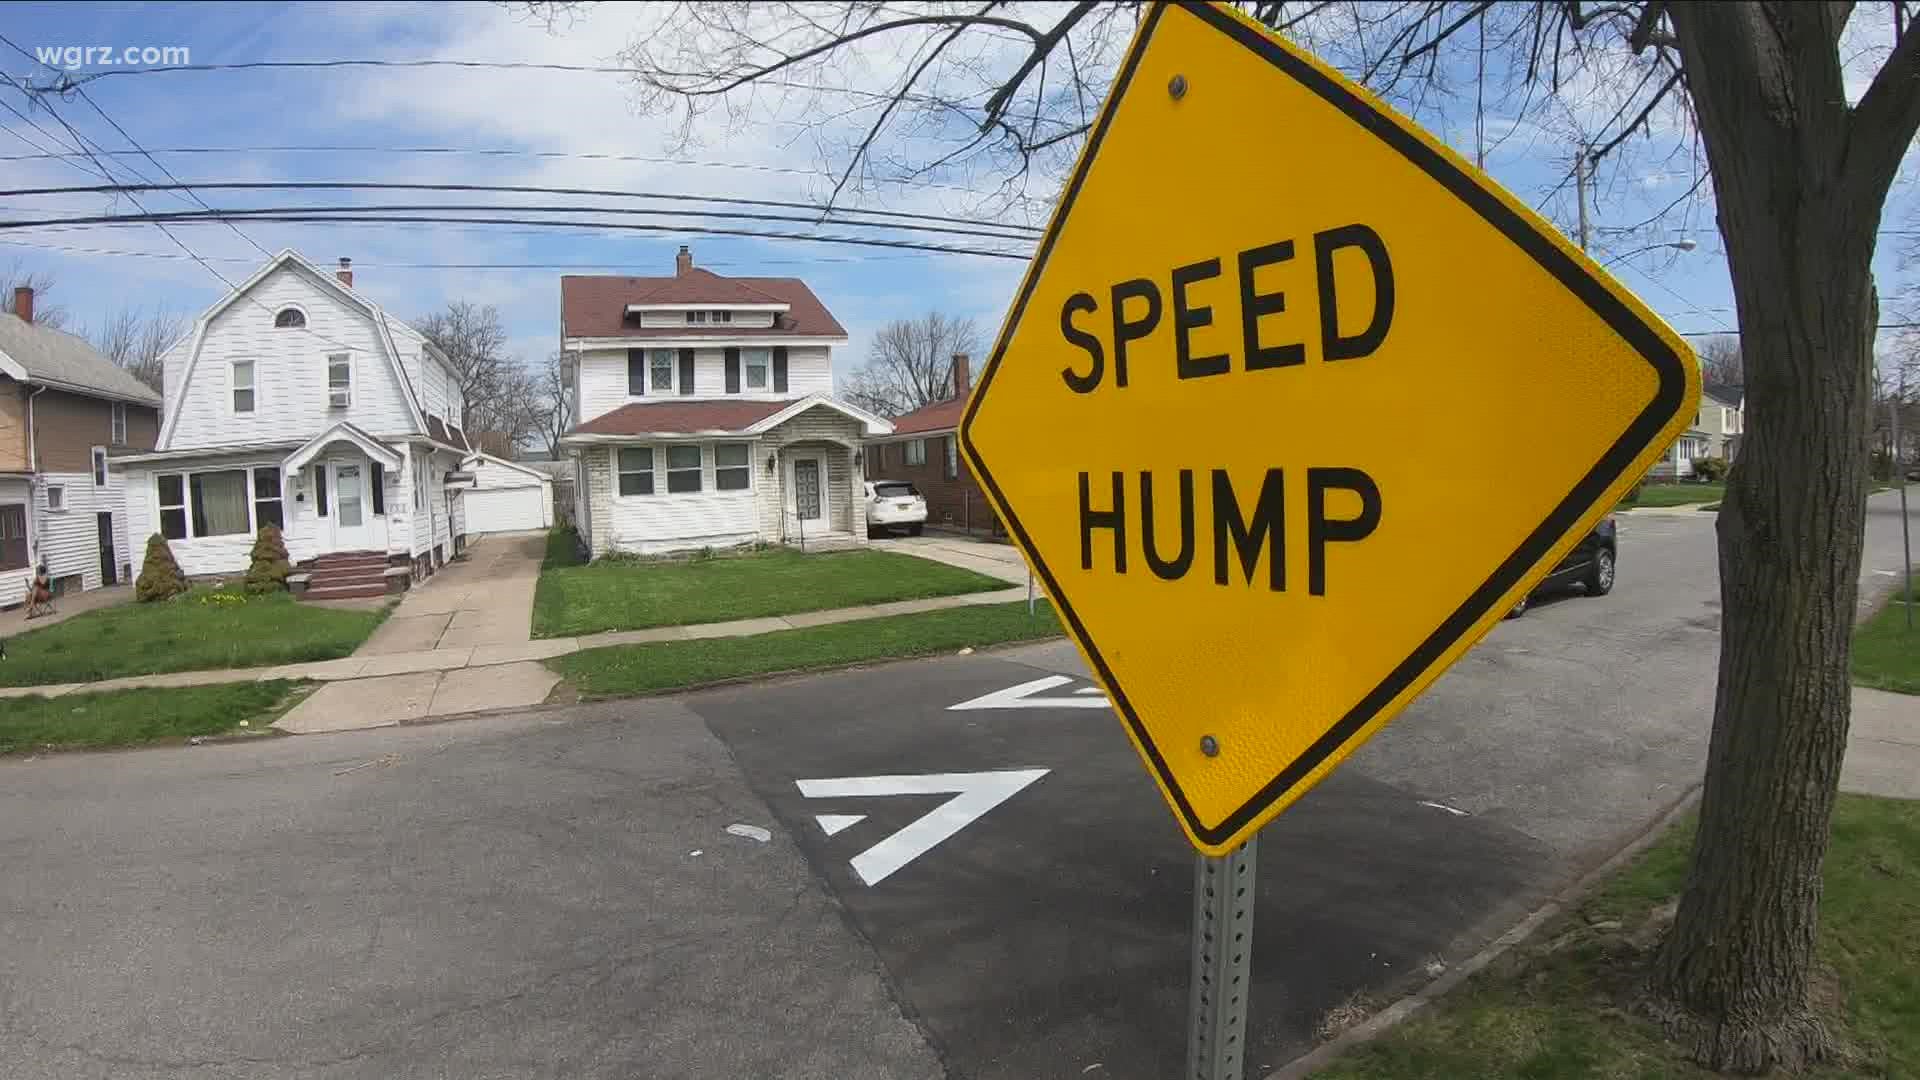 Speeding cars on Buffalo's residential streets has been a concern for some city residents for some time.